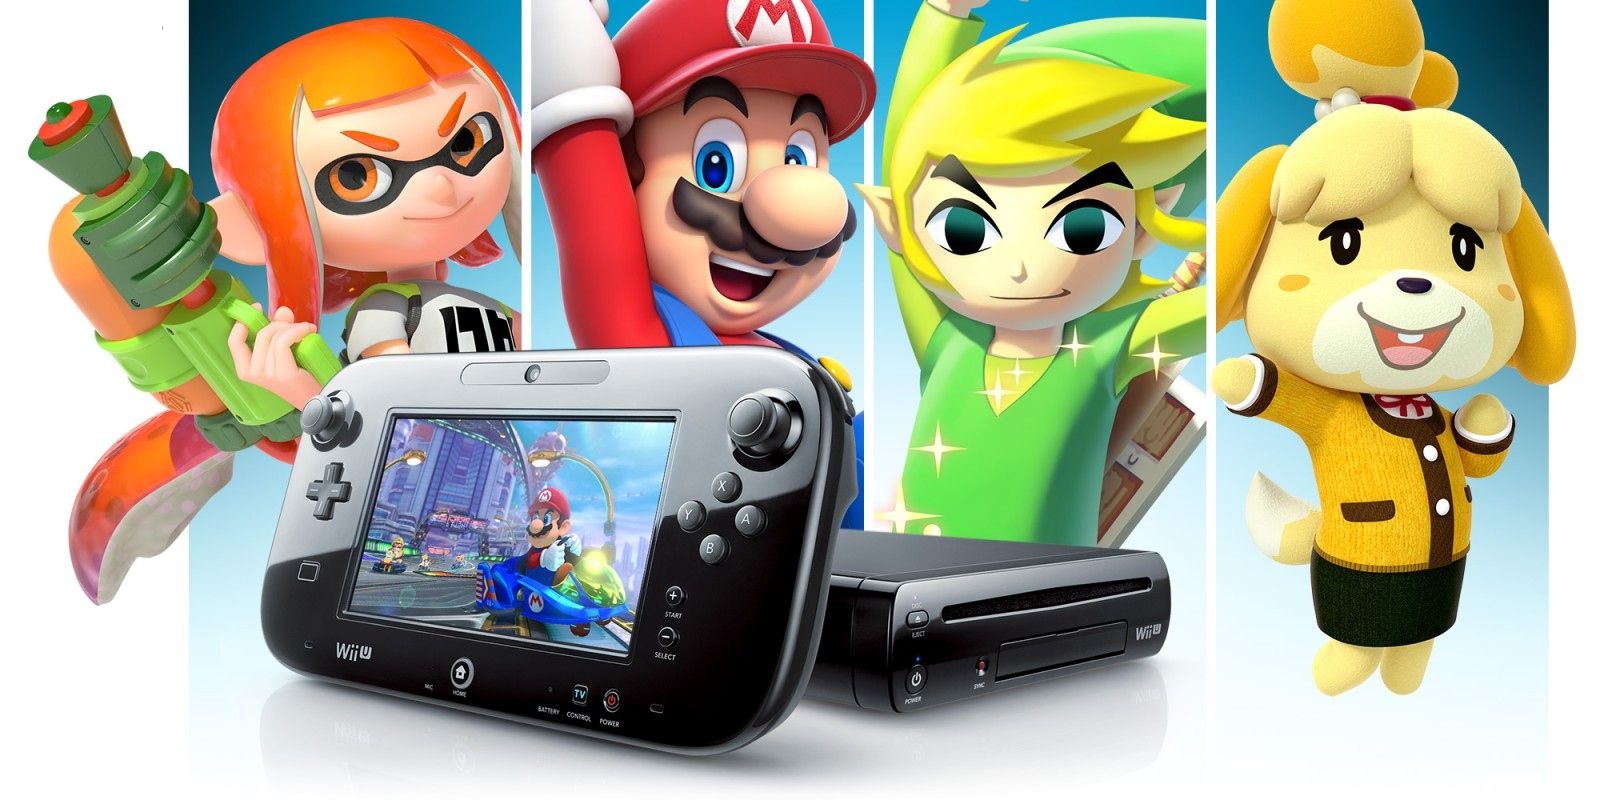 can a wii u play wii games